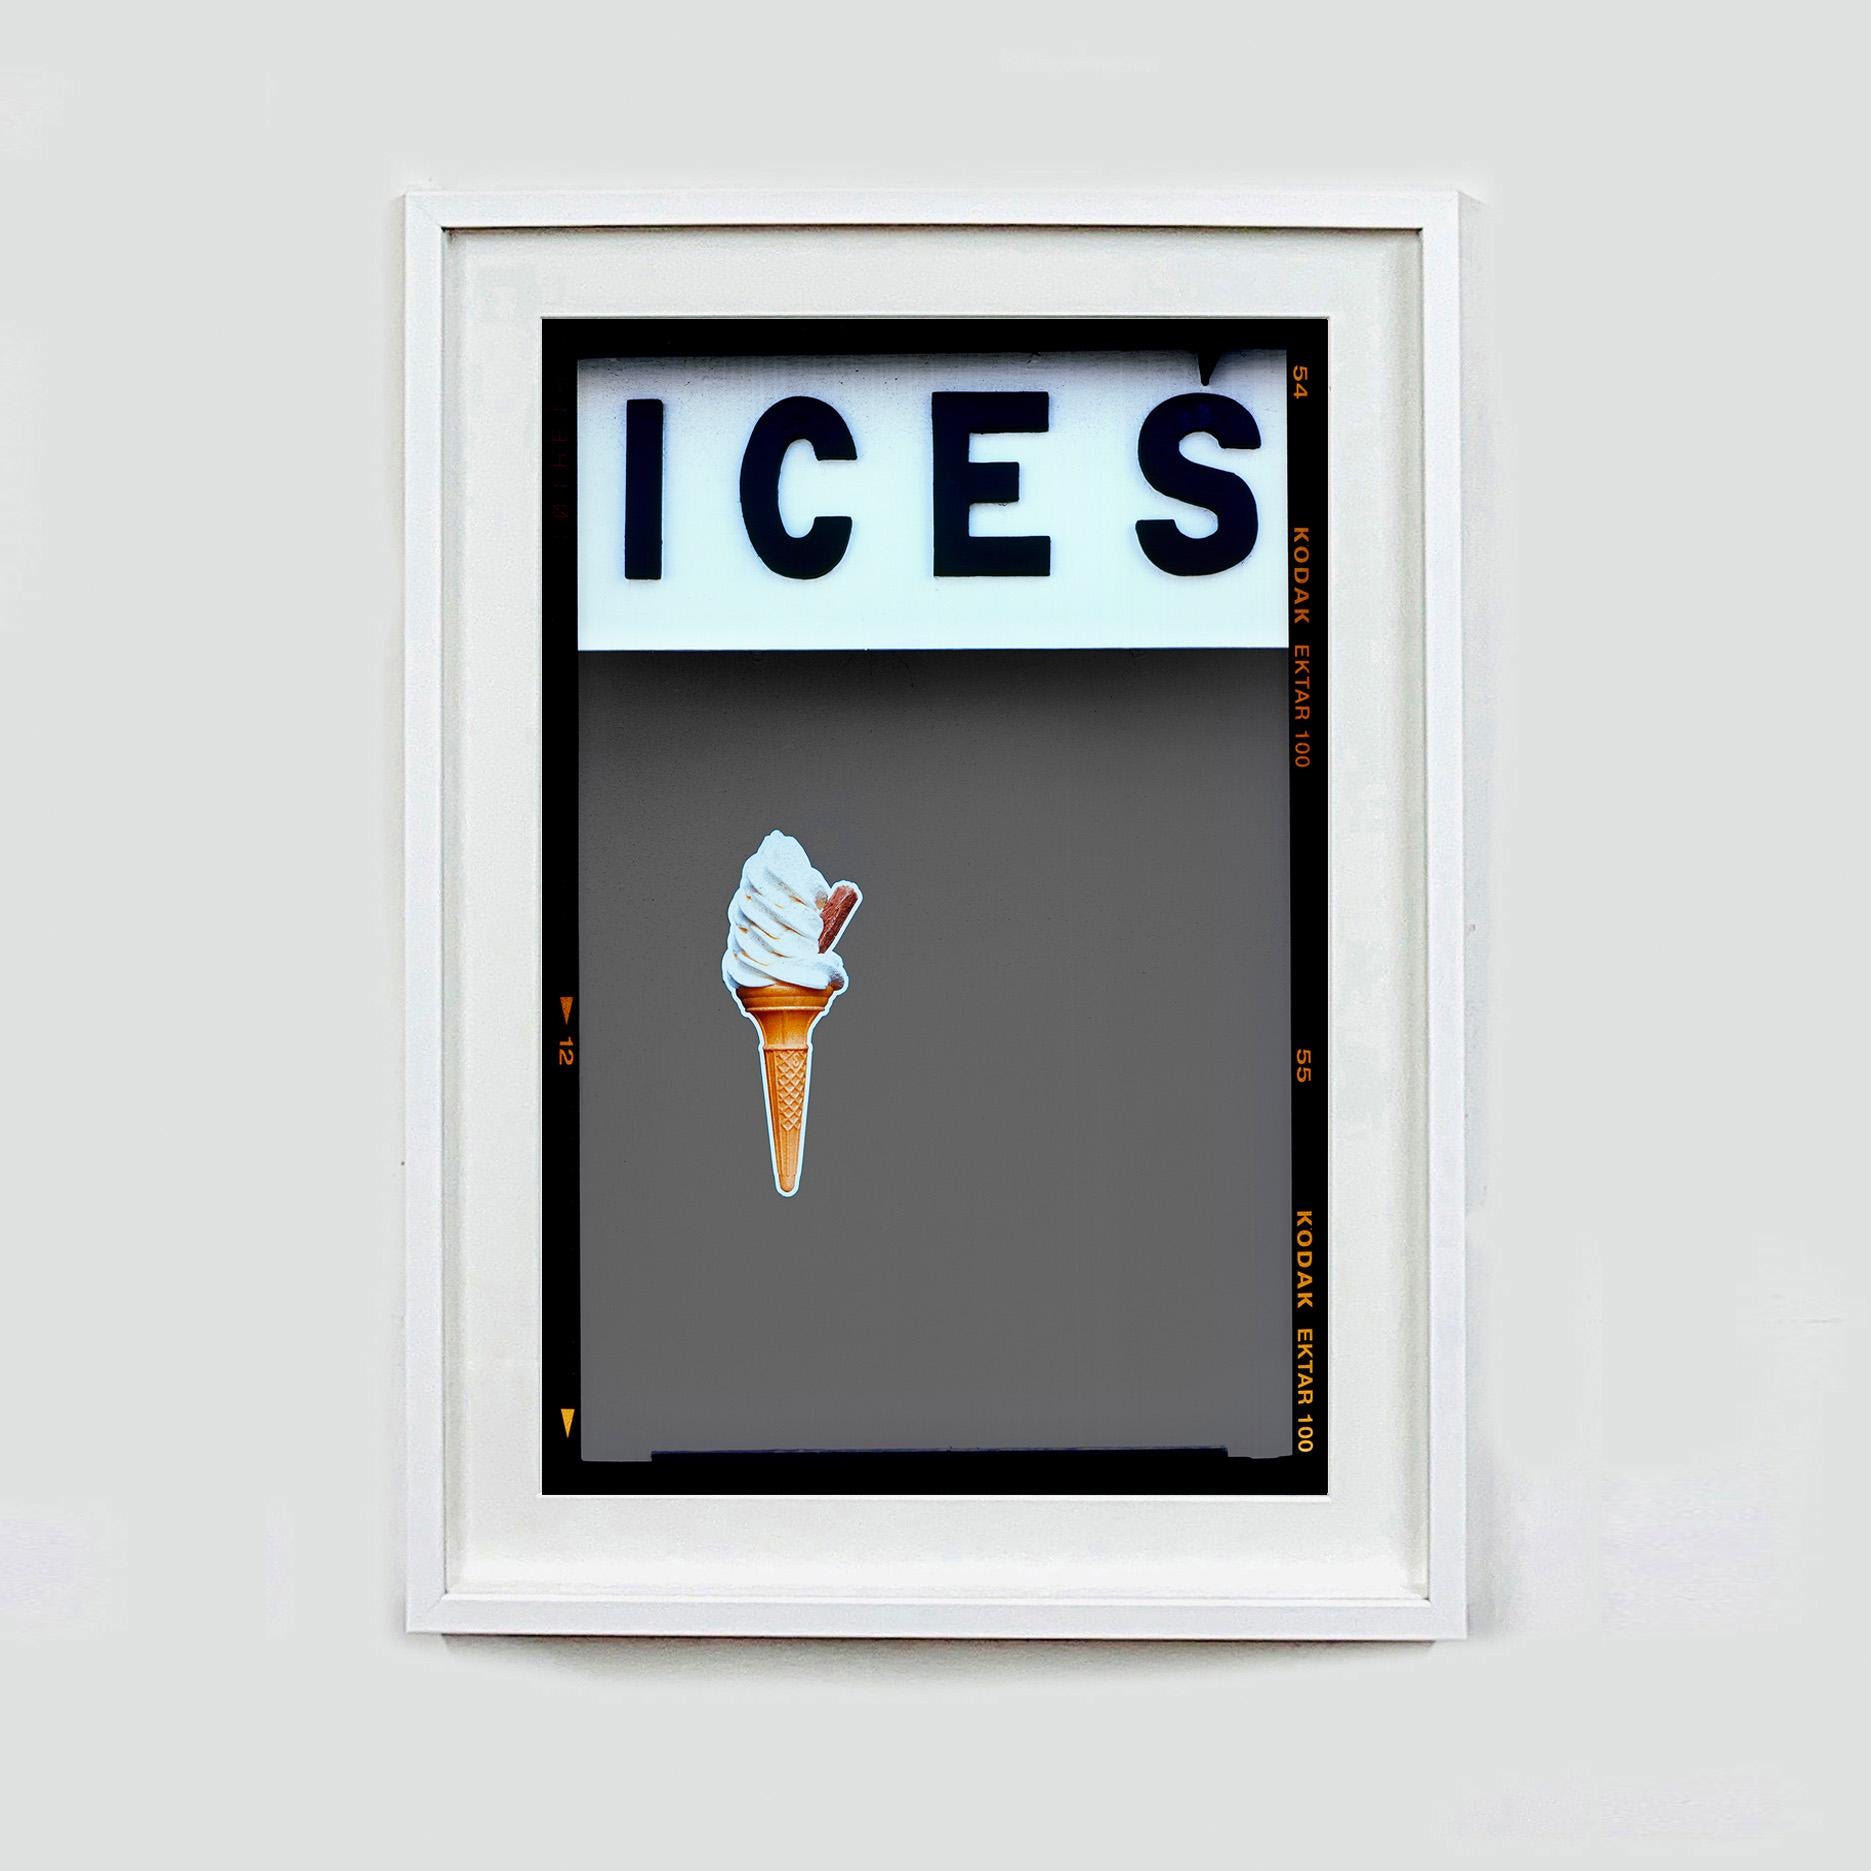 Ices (Grey), Bexhill-on-Sea - British seaside color photography - Contemporary Print by Richard Heeps